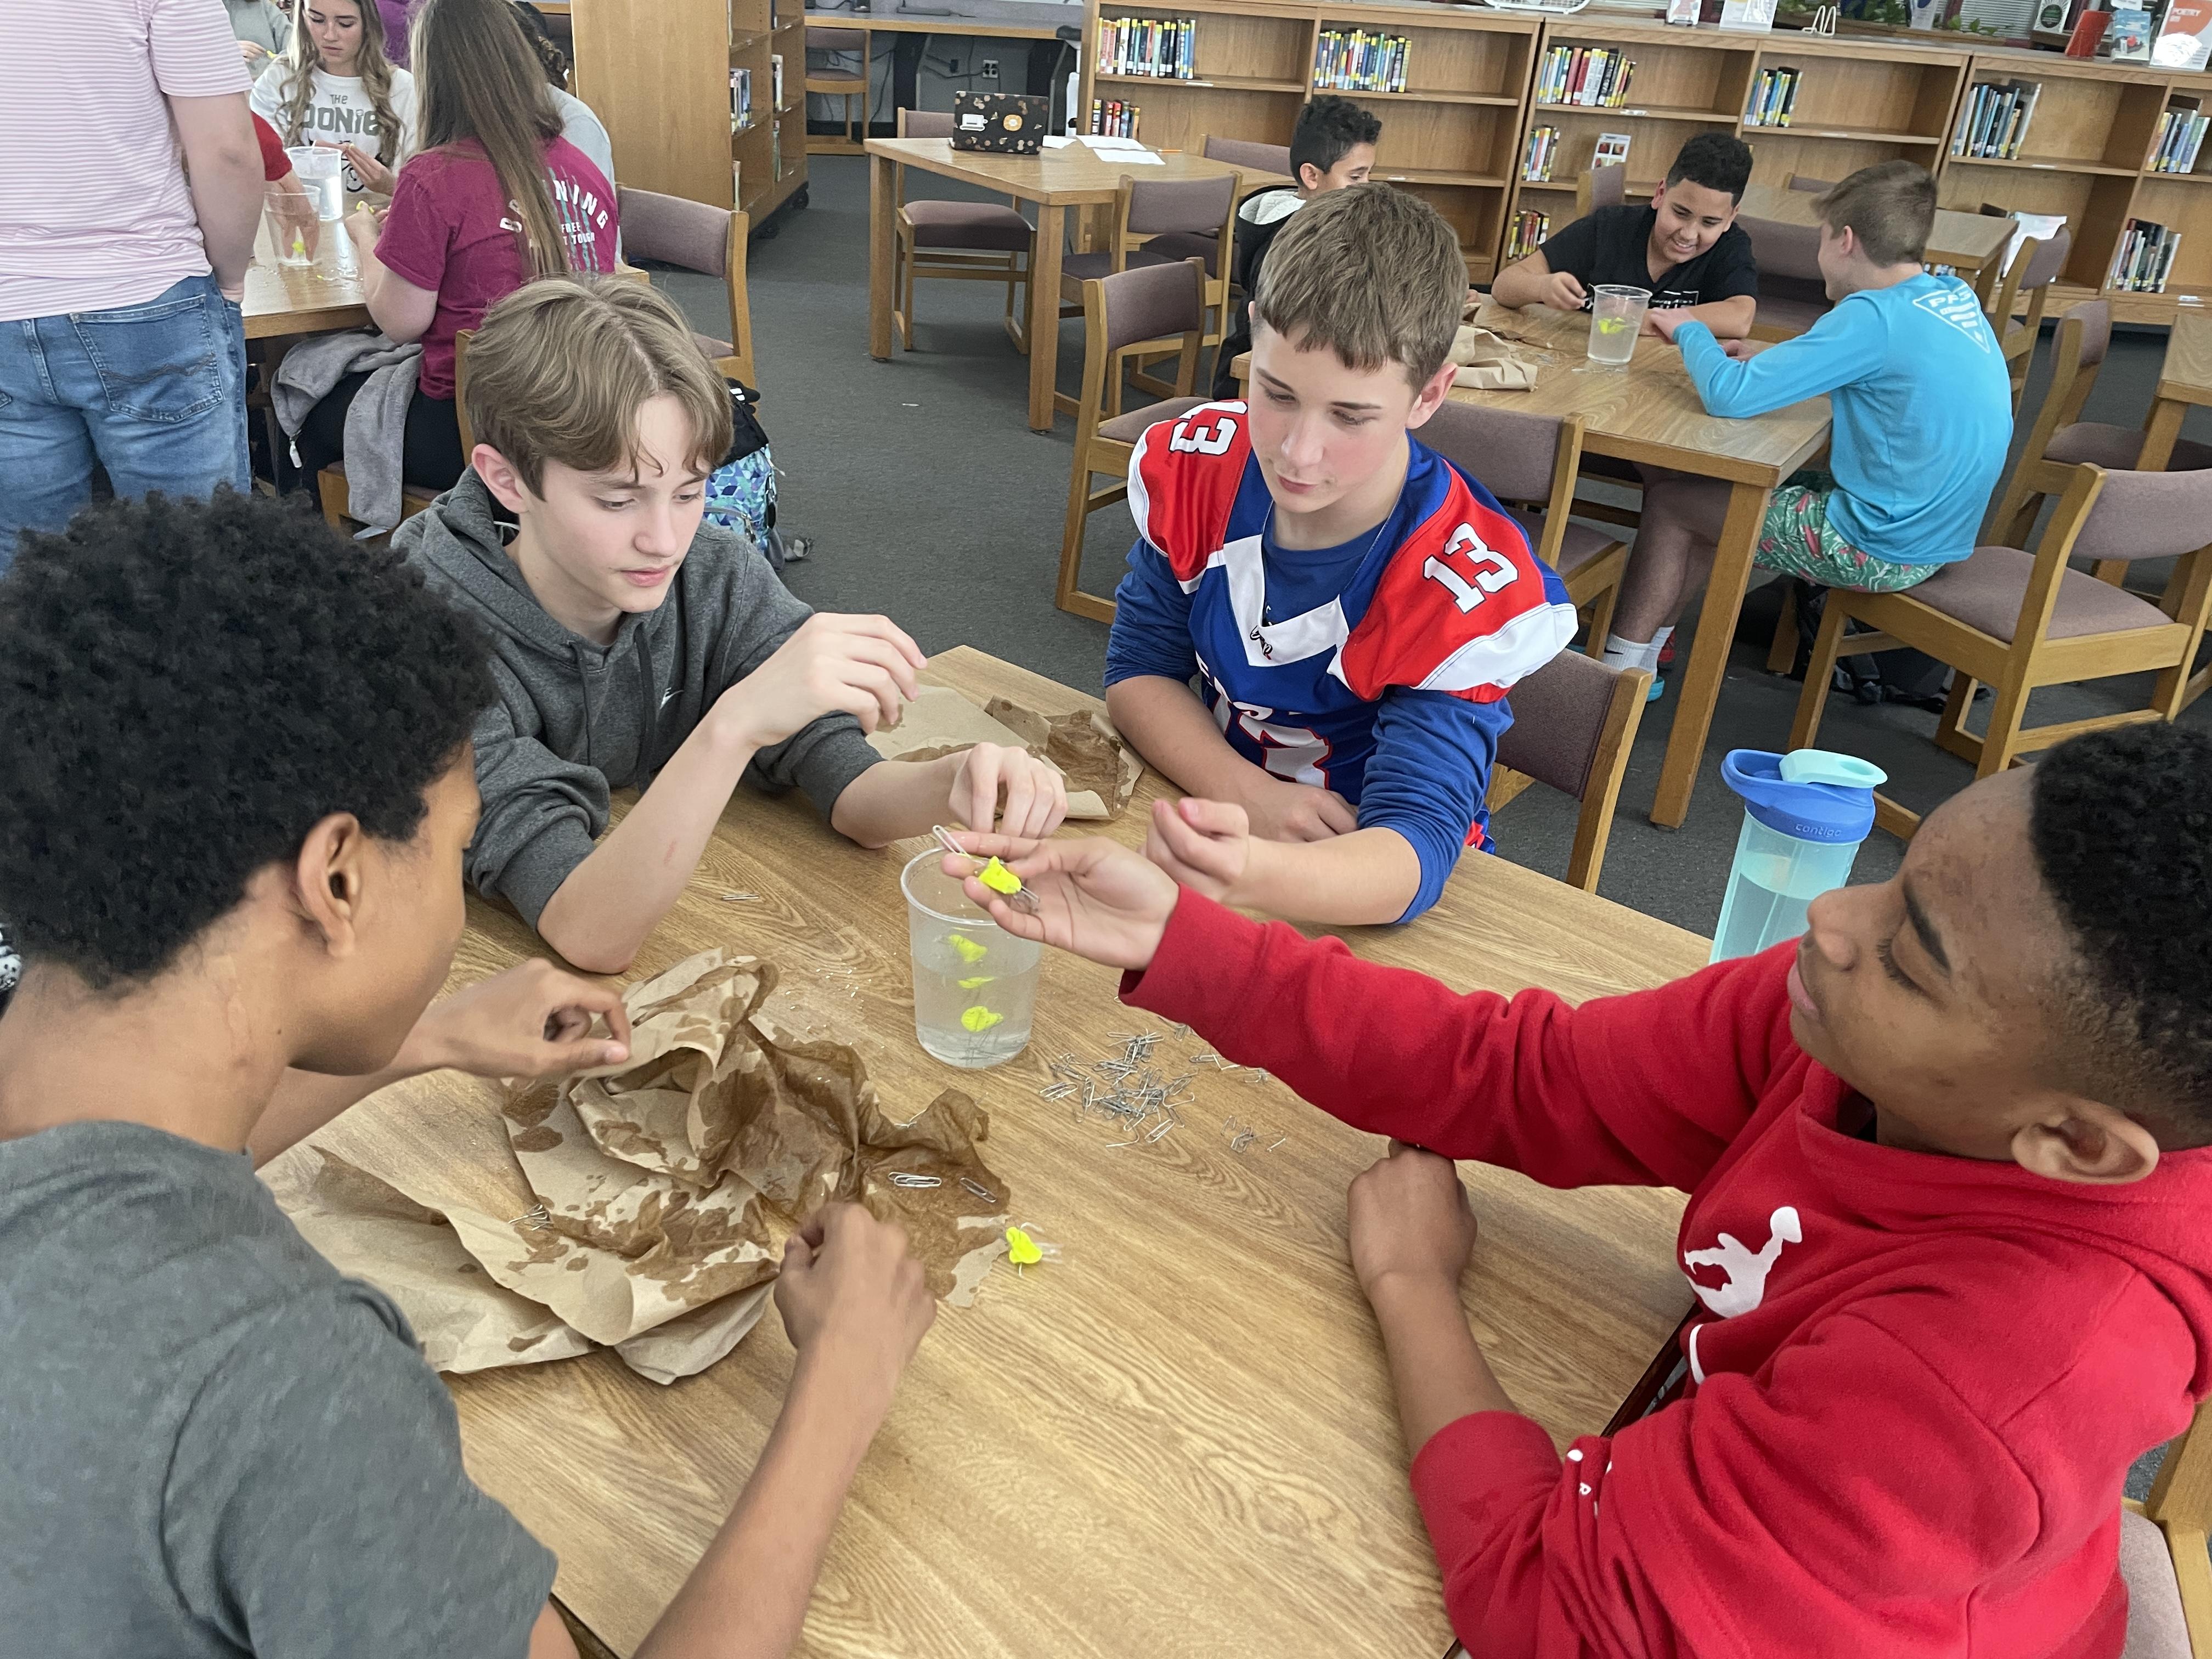 Students at Tucker Creek Middle School take part in an engineering design challenge during a visit by engineers from Fleet Readiness Center East (FRCE). The visit was part of the depot’s National Engineers Week outreach efforts, which saw FRCE engineers visiting four elementary schools, 18 middle schools and four high schools in Eastern North Carolina and engaging with more than 2,700 area students. 